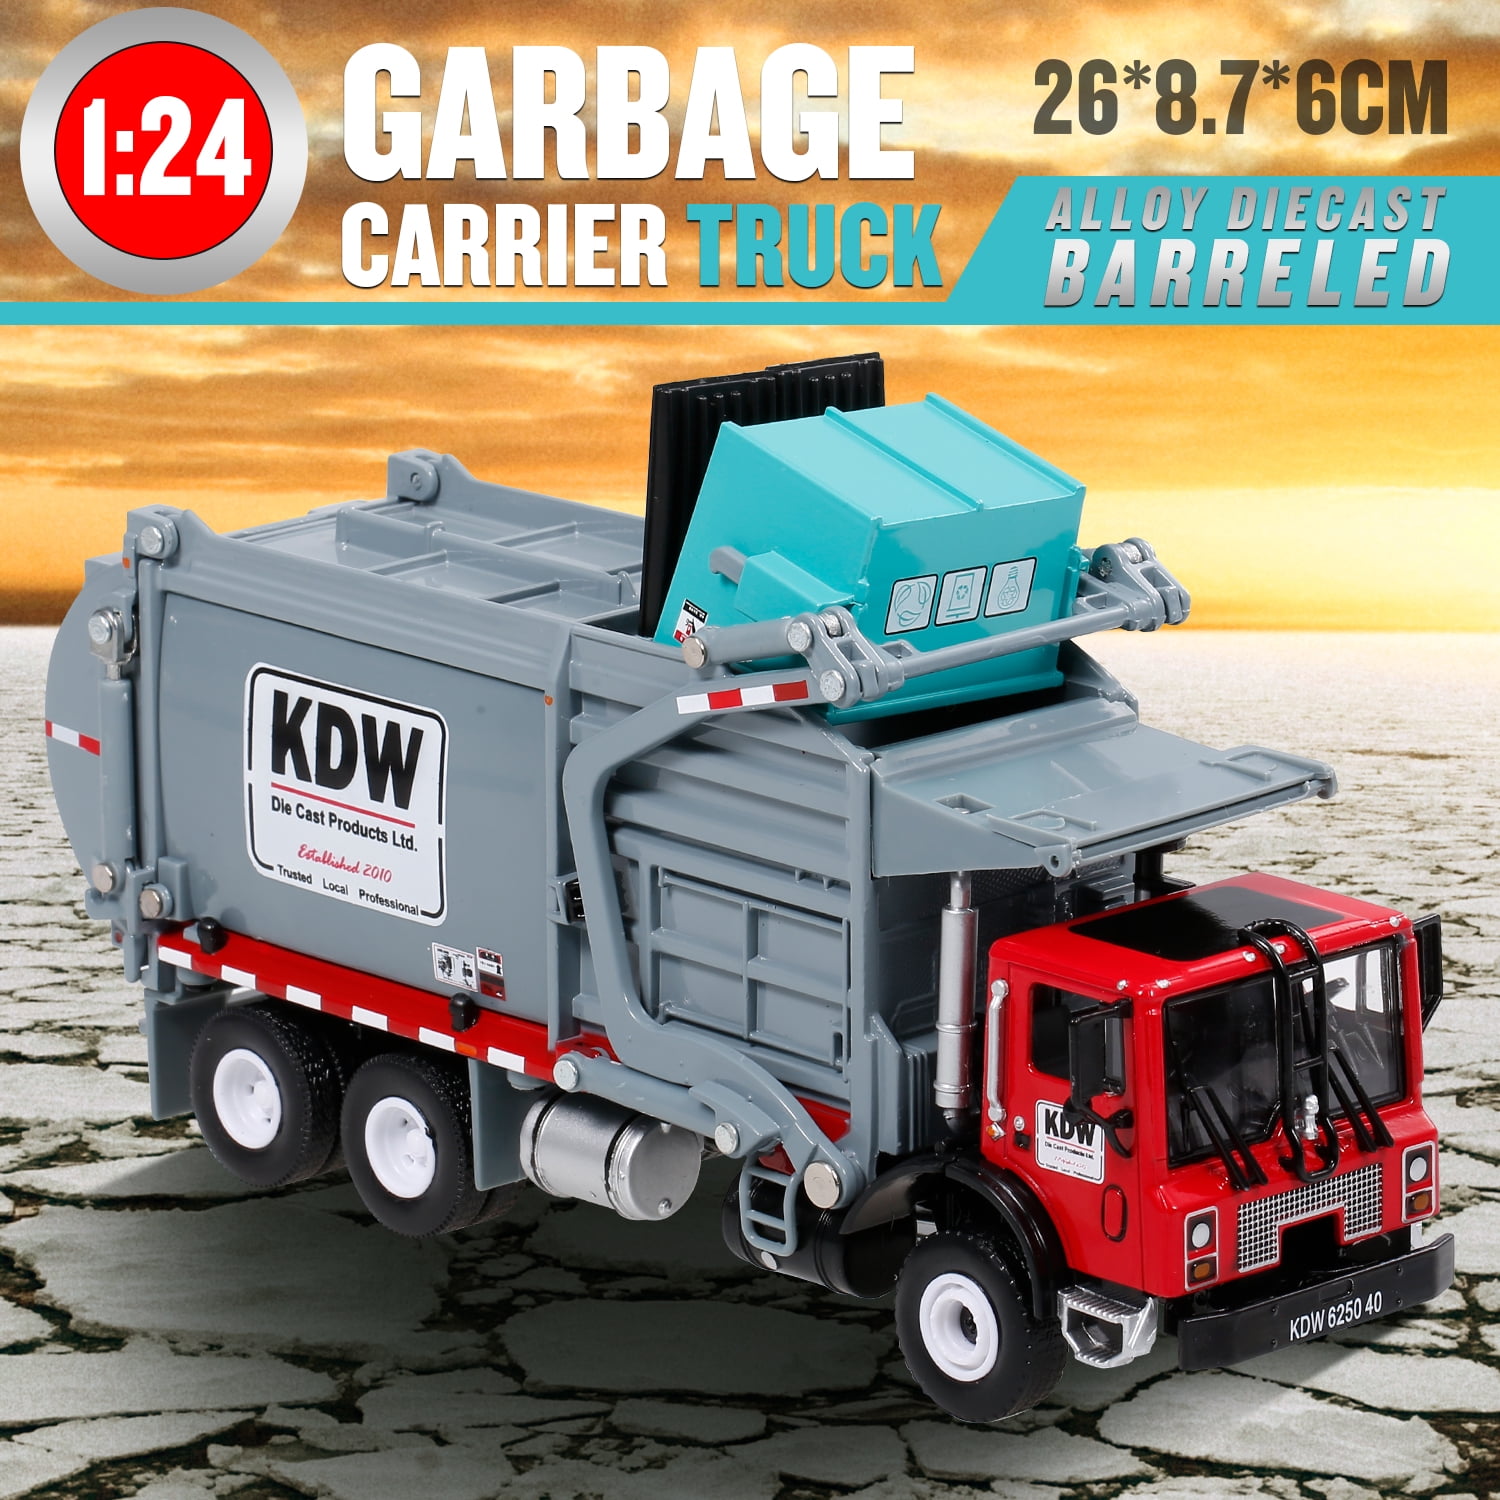 KDW 1:24 Diecast Transporter Garbage Truck Alloy Vehicle Car Model Kid Toy Gift